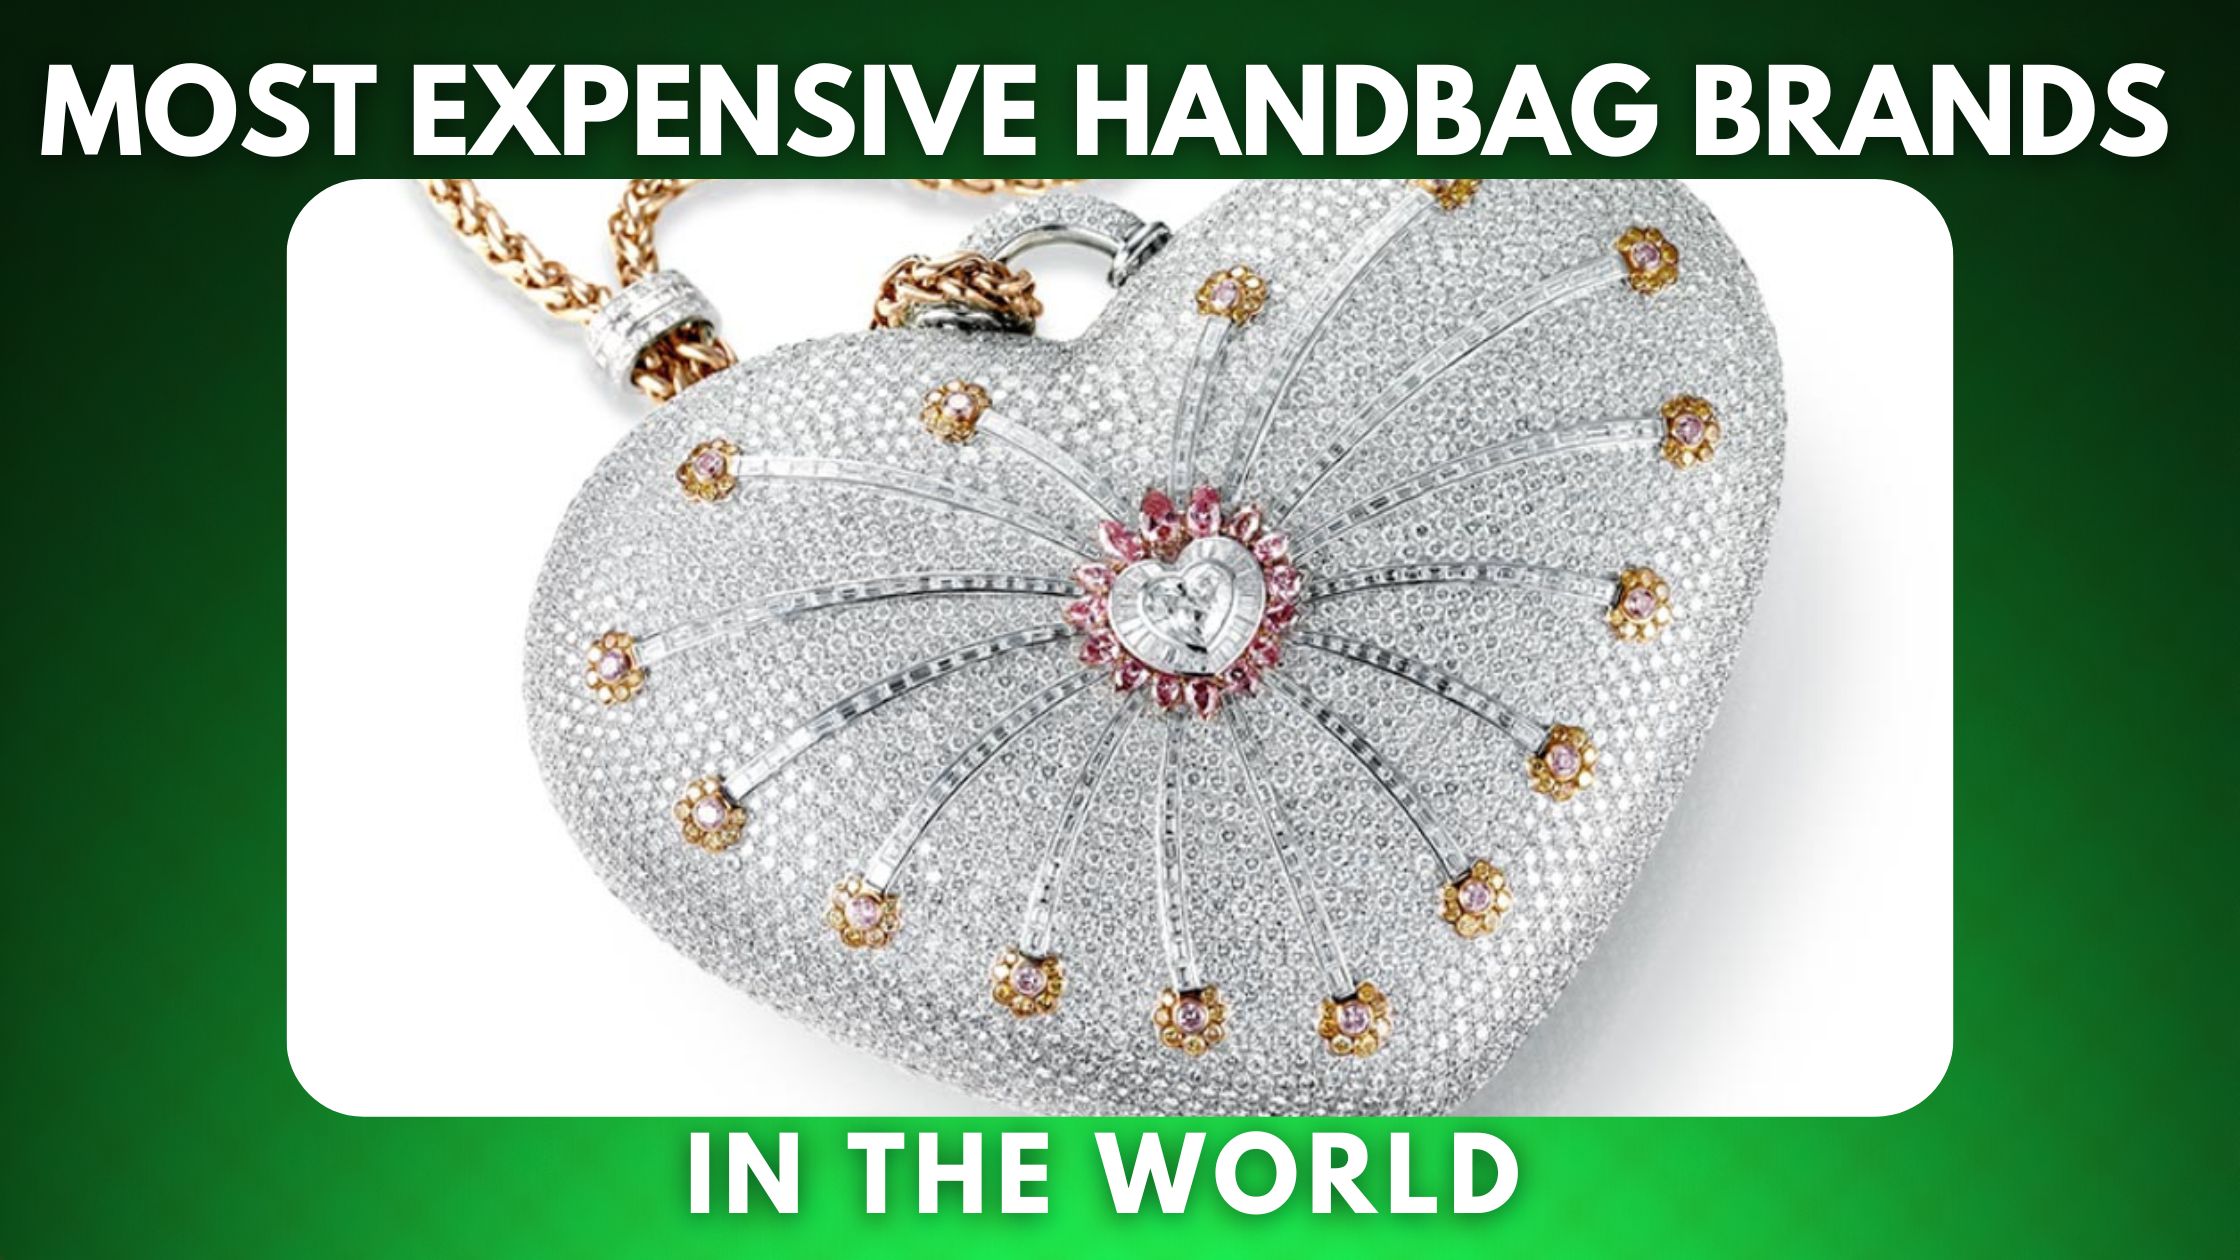 The 10 Most Expensive Handbag Brands in the World (2023)